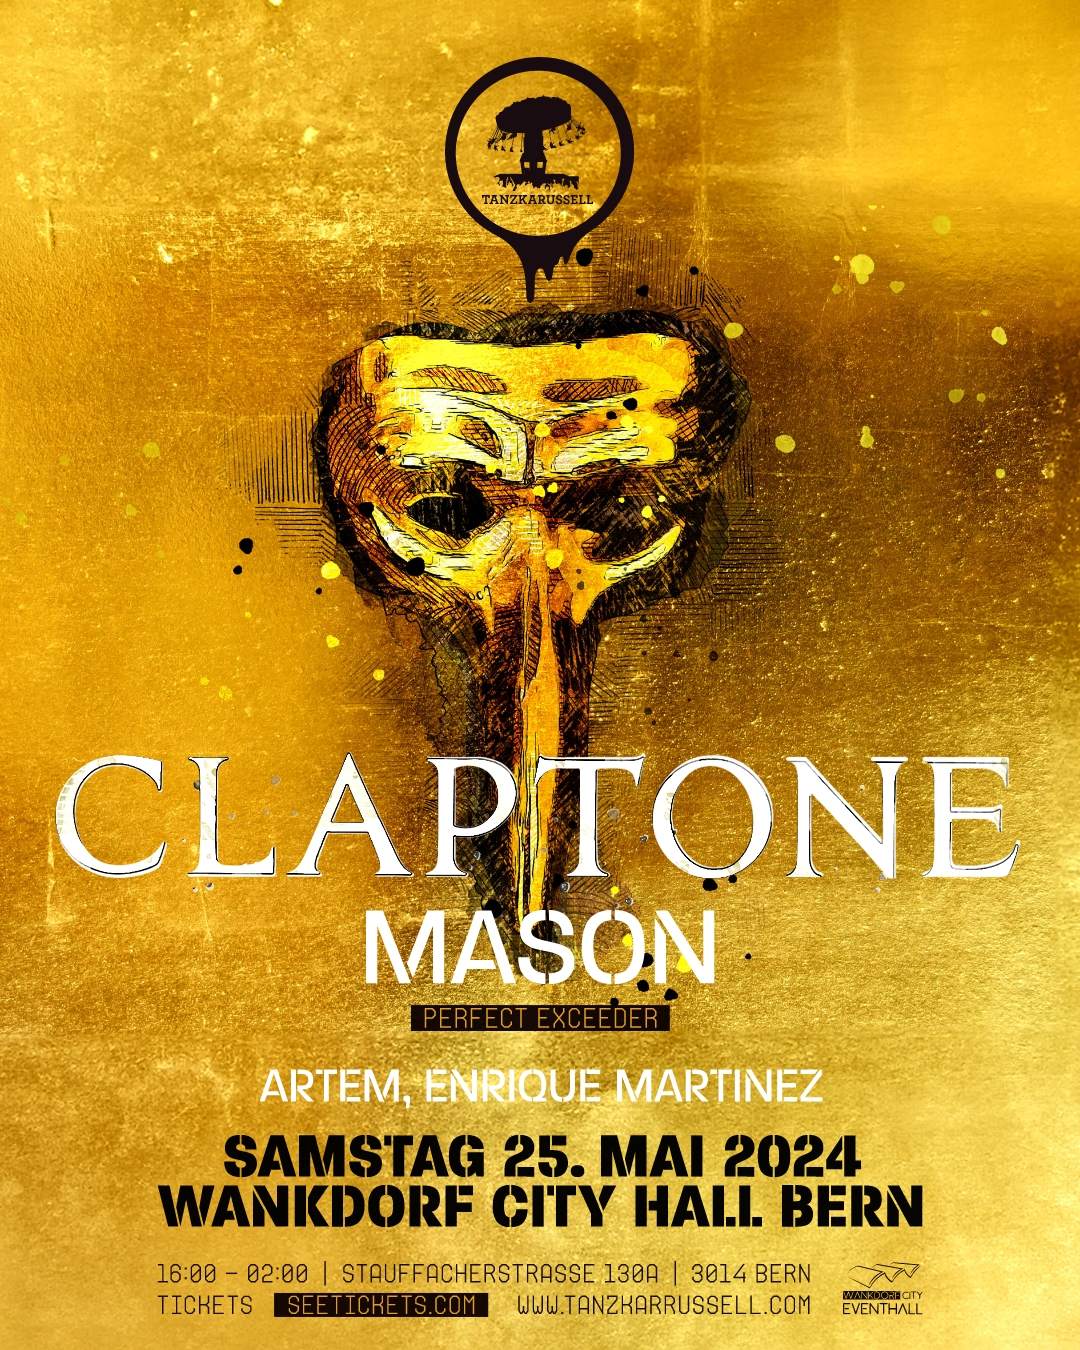 Tanzkarussell with Claptone & Mason - フライヤー表